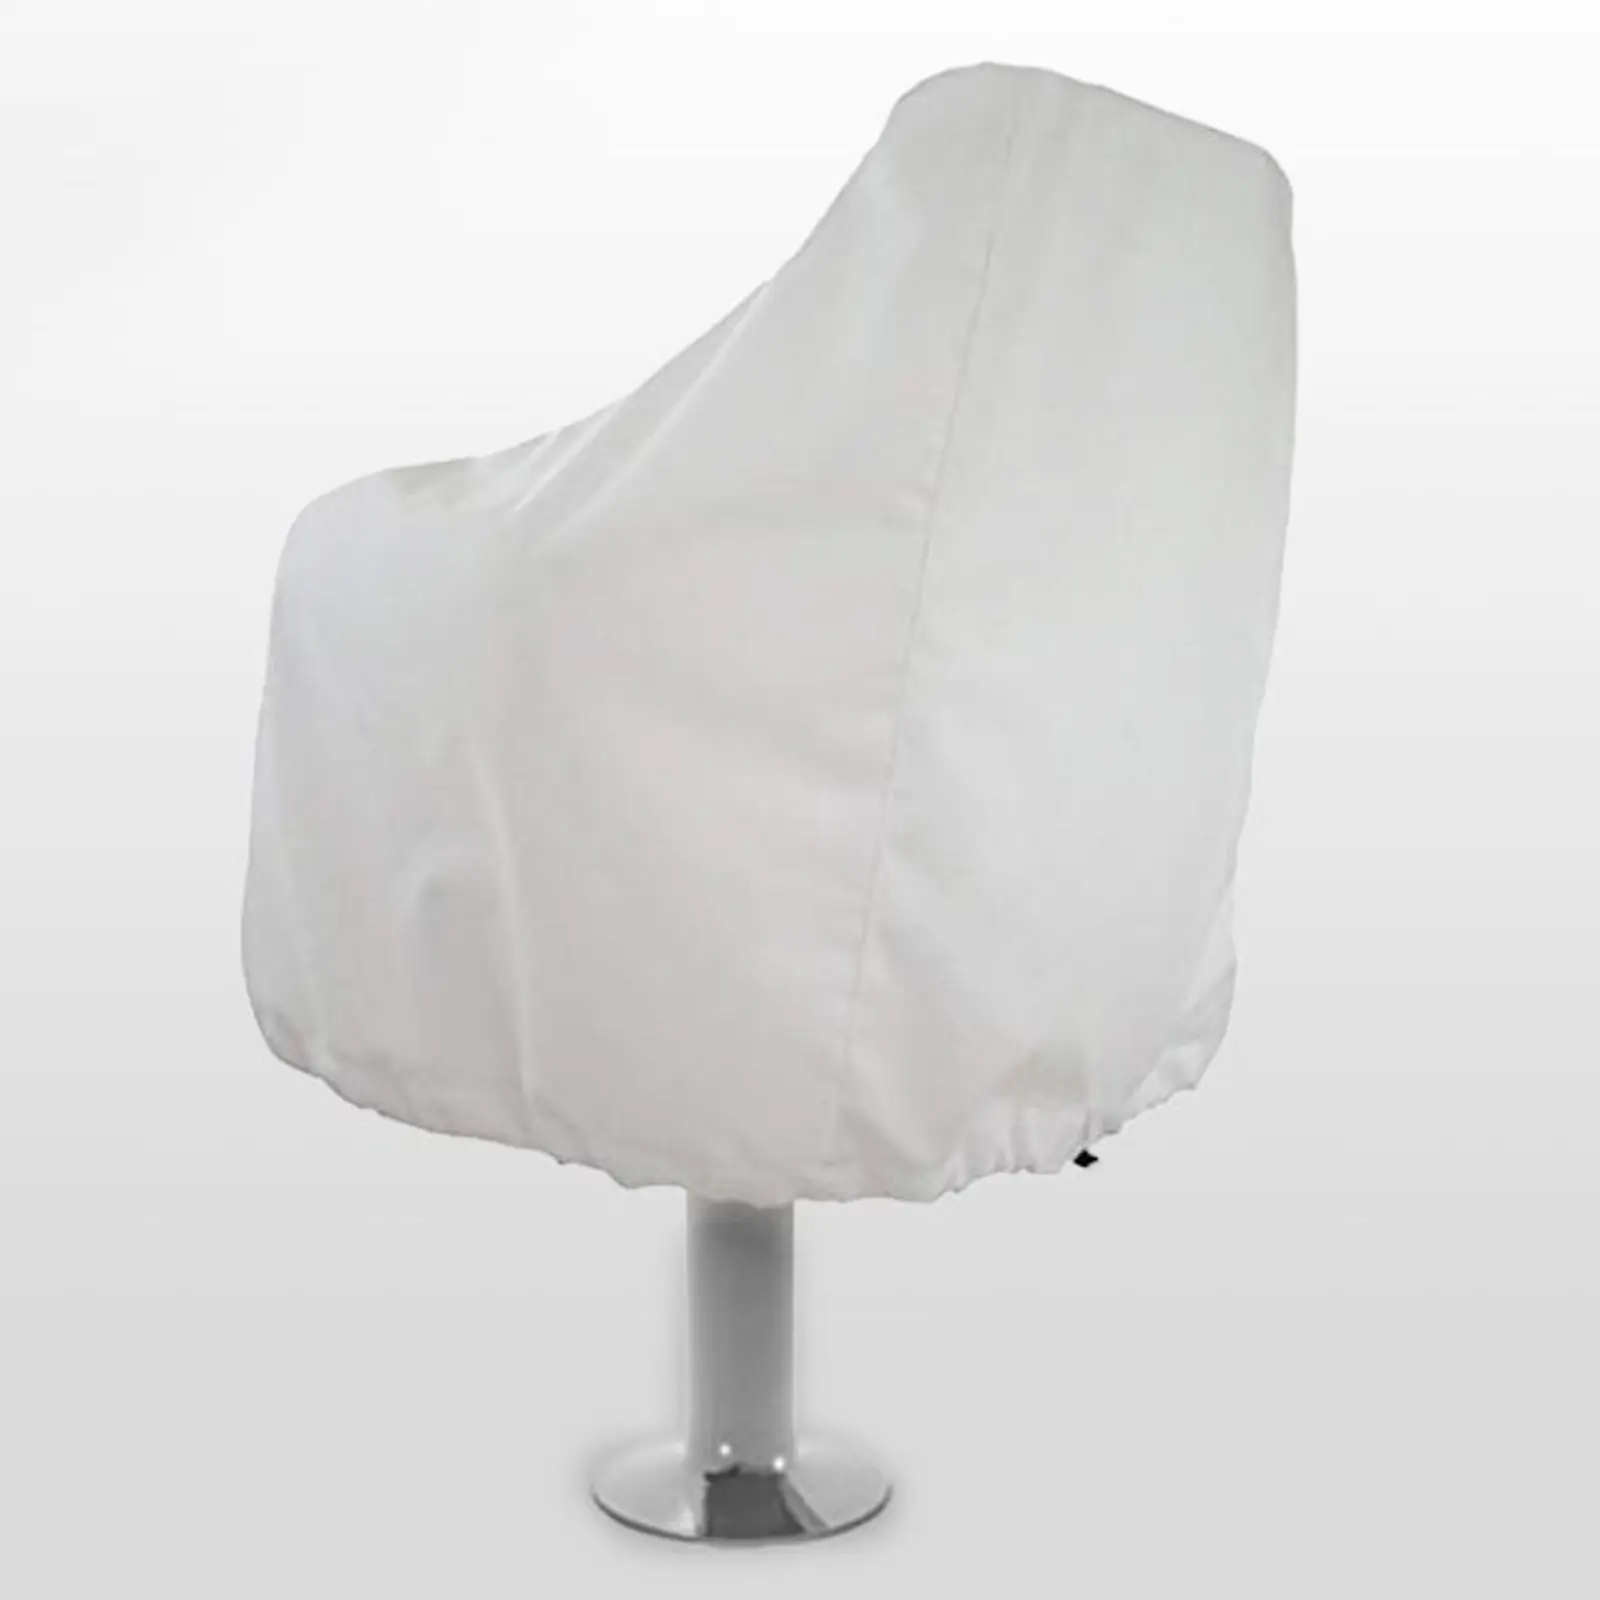 Boat Seat Cover Outdoor Protection 210D Oxford Cloth Dust Yacht Waterproof UV Resistant Chair Furniture Cover